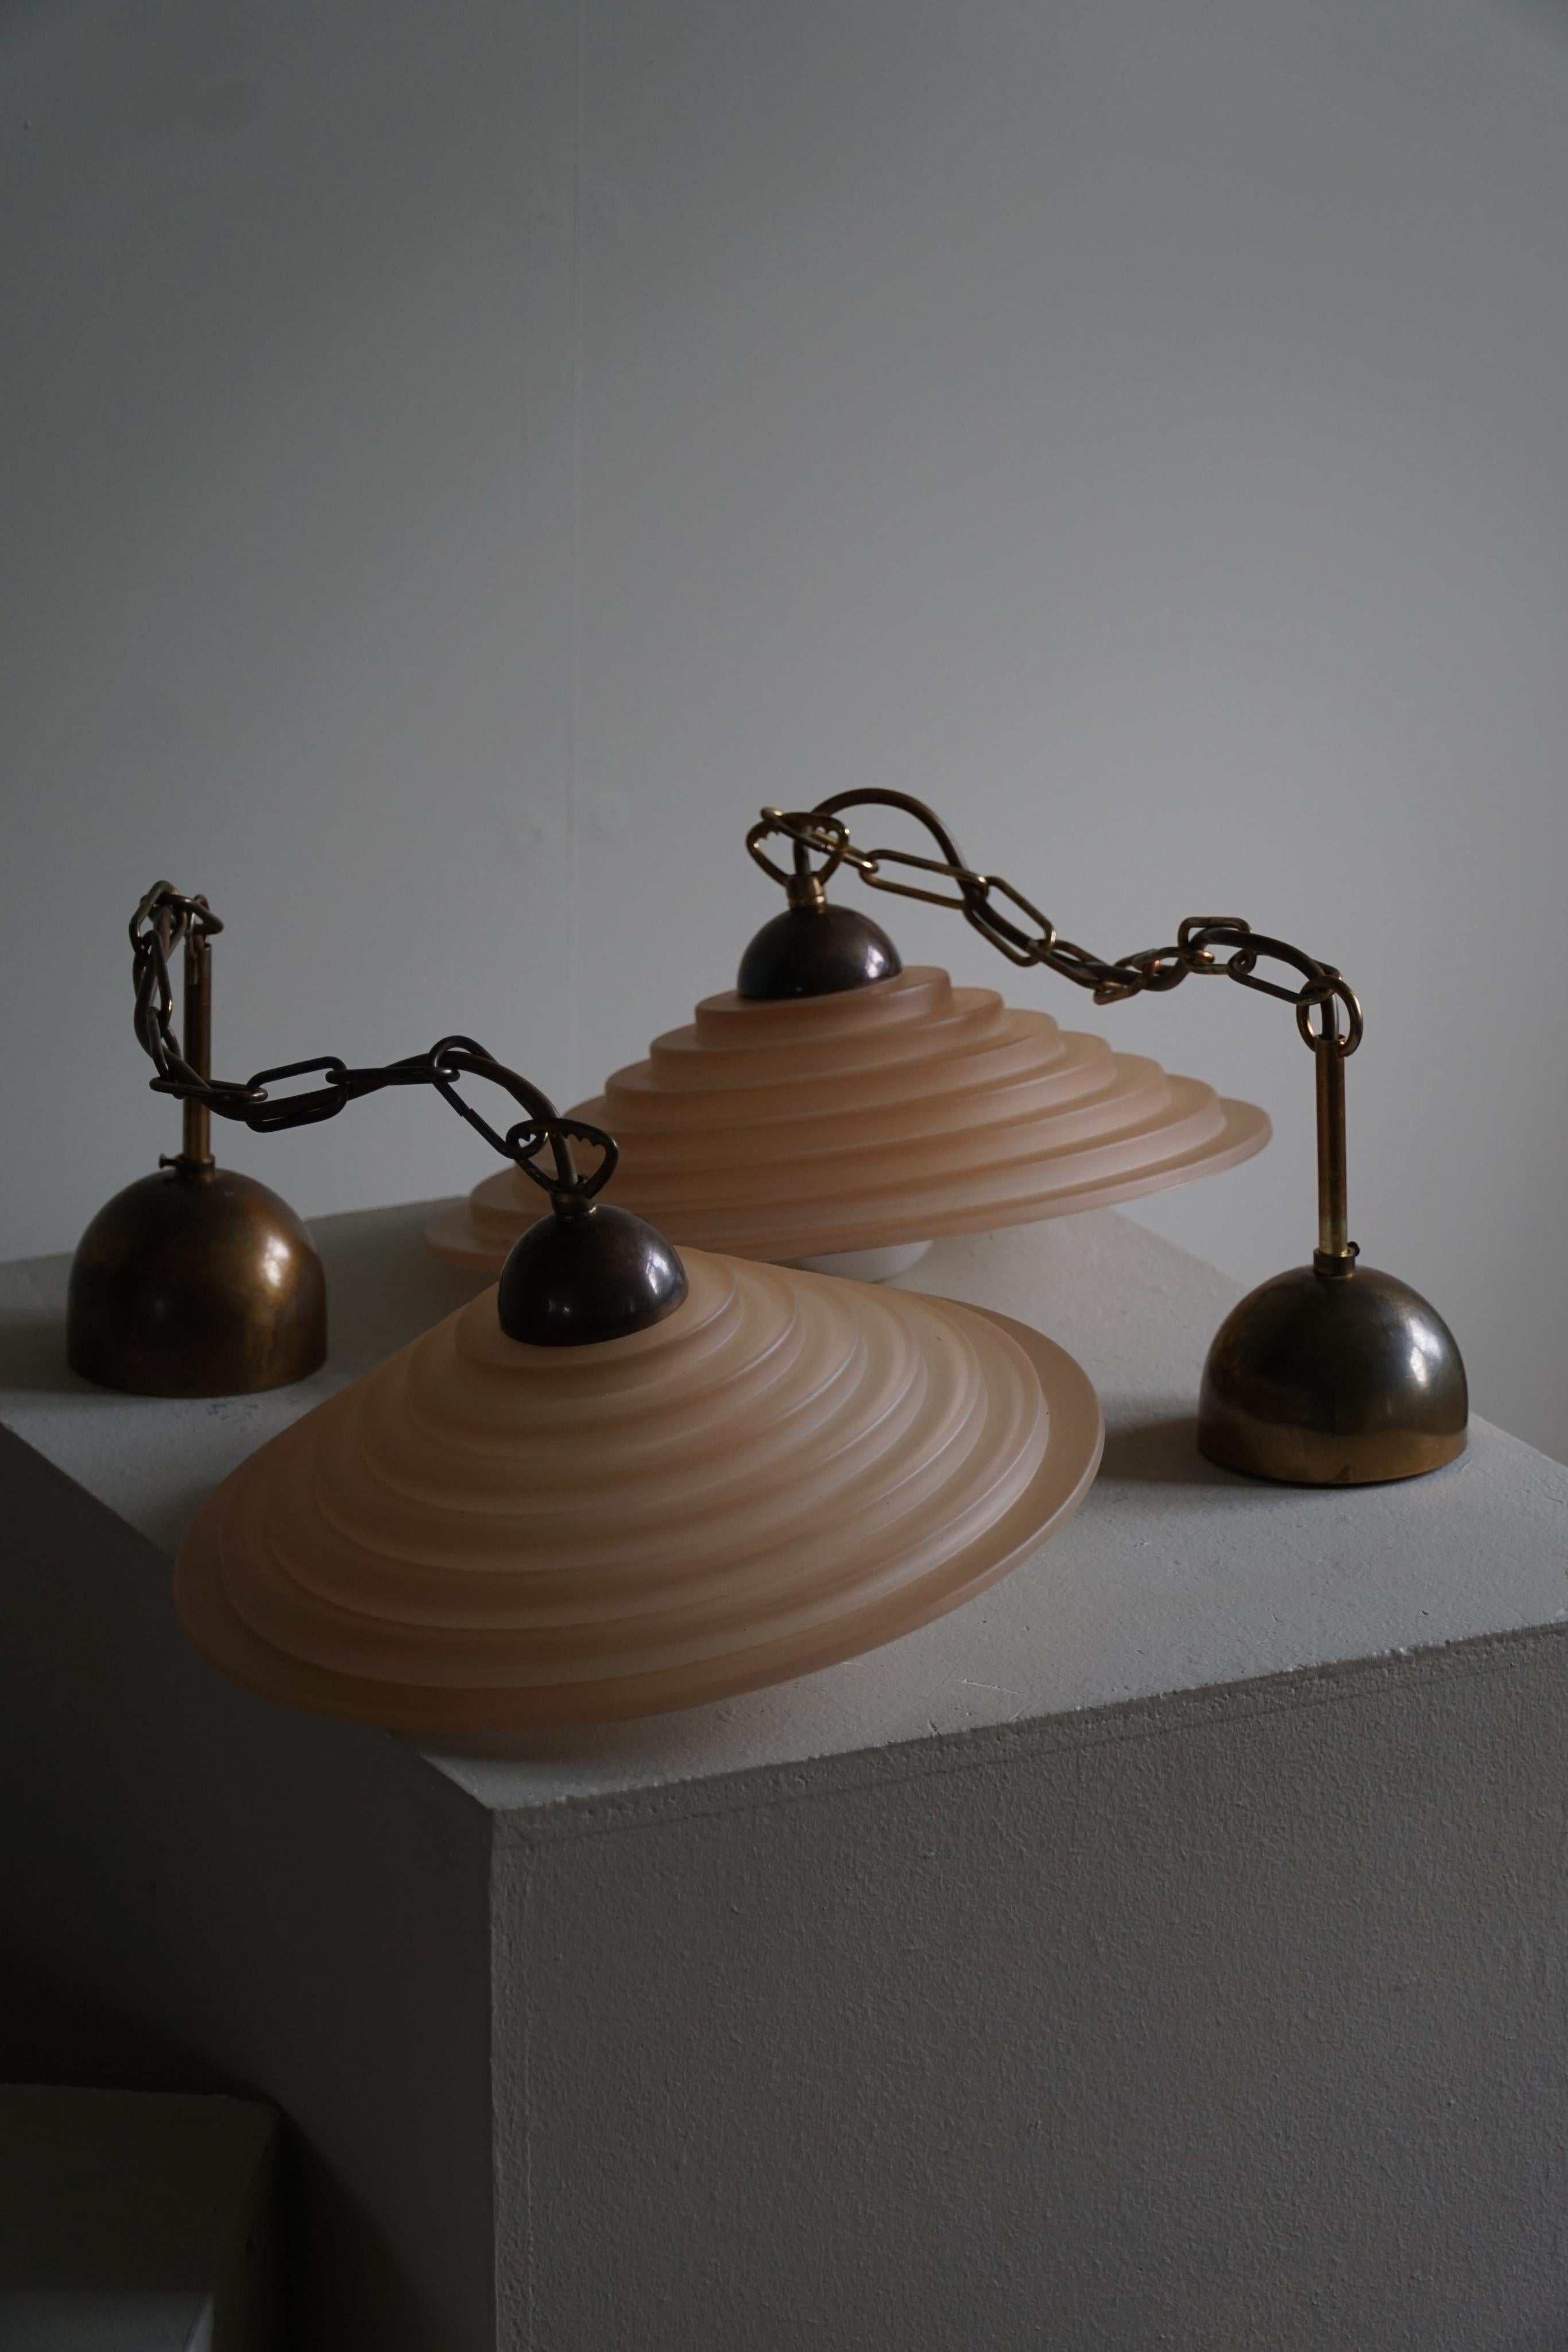 A charming pair of pendant lights in pink glass. Made in Denmark in the early 1900s.

The pair remains in really good condition. These beautiful vintage lights will complement many modern interior styles. A Modern, Scandinavian, Bohemian, Classic or